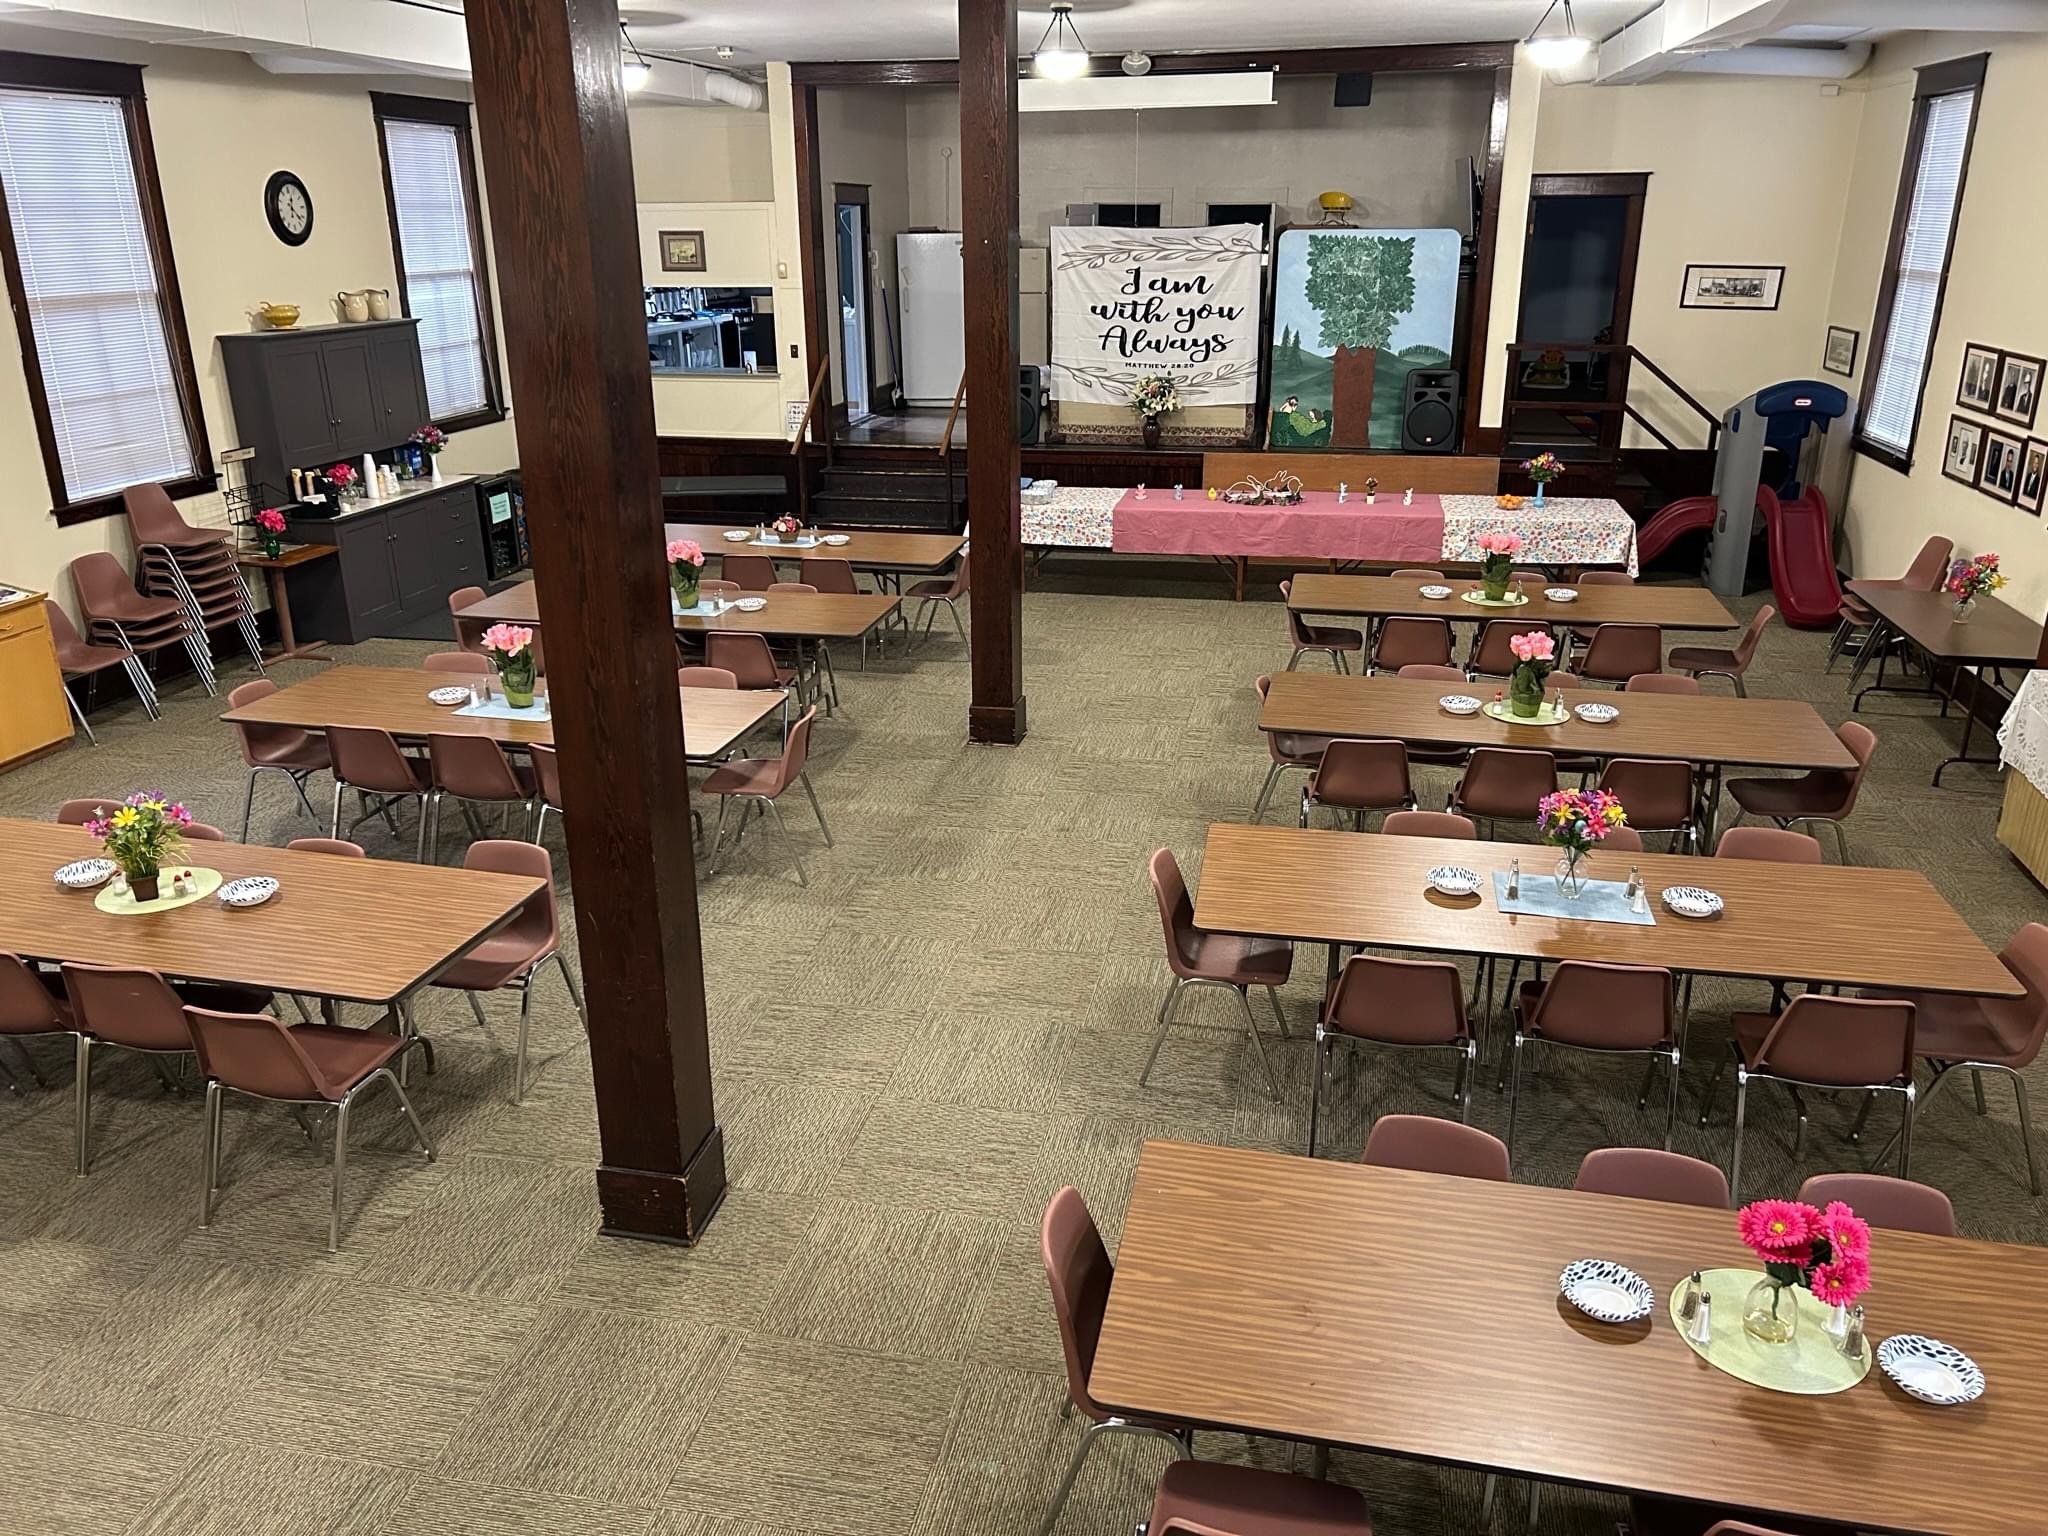 April 9, 2023 - Fellowship Hall is ready for Easter Breakfast!